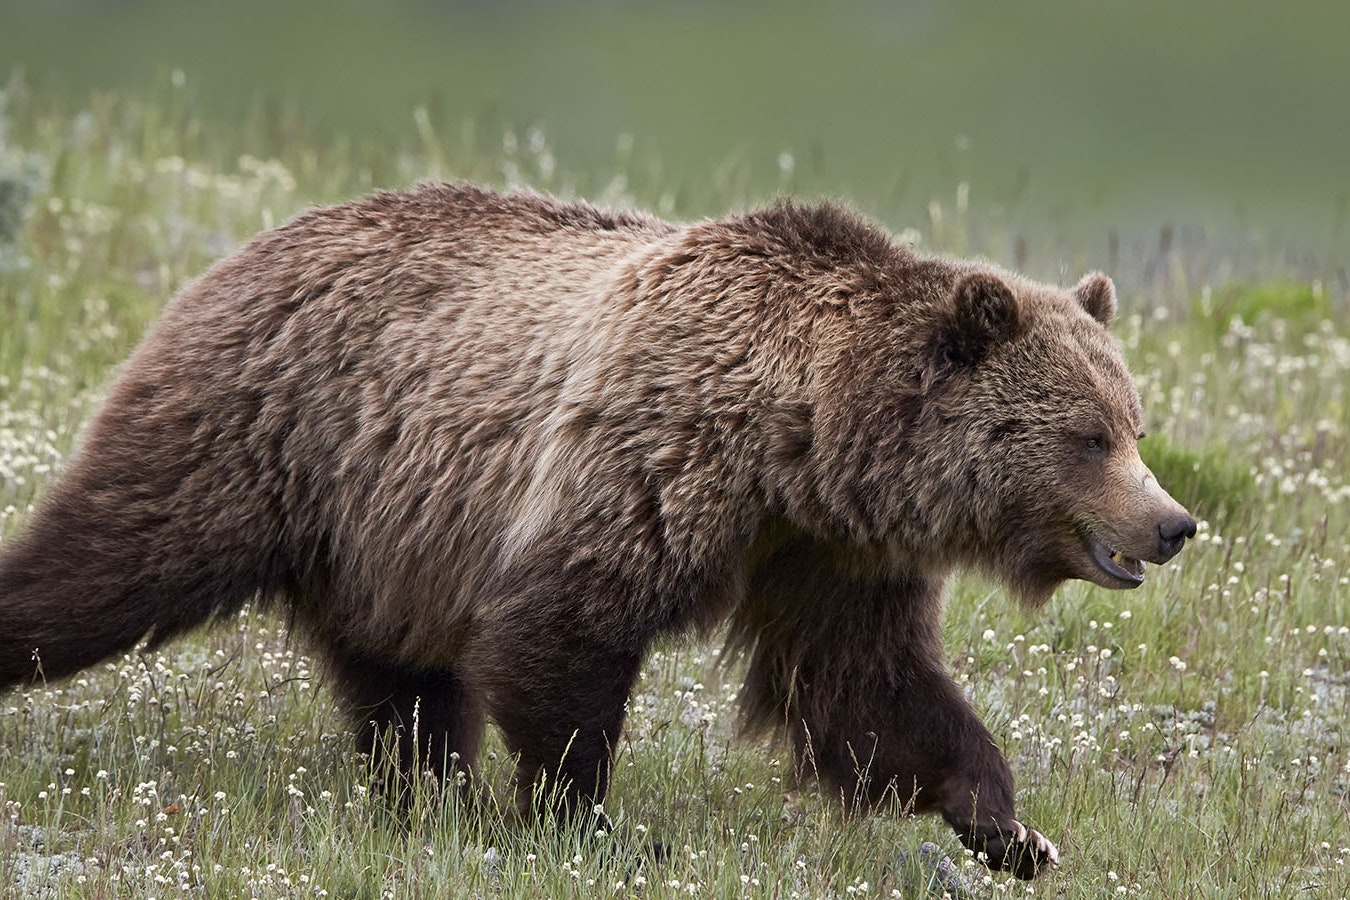 Grizzly bears in the Greater Yellowstone Ecosystem have recovered enough that many Wyoming wildlife officials are pushing to delist them from endangered species status.